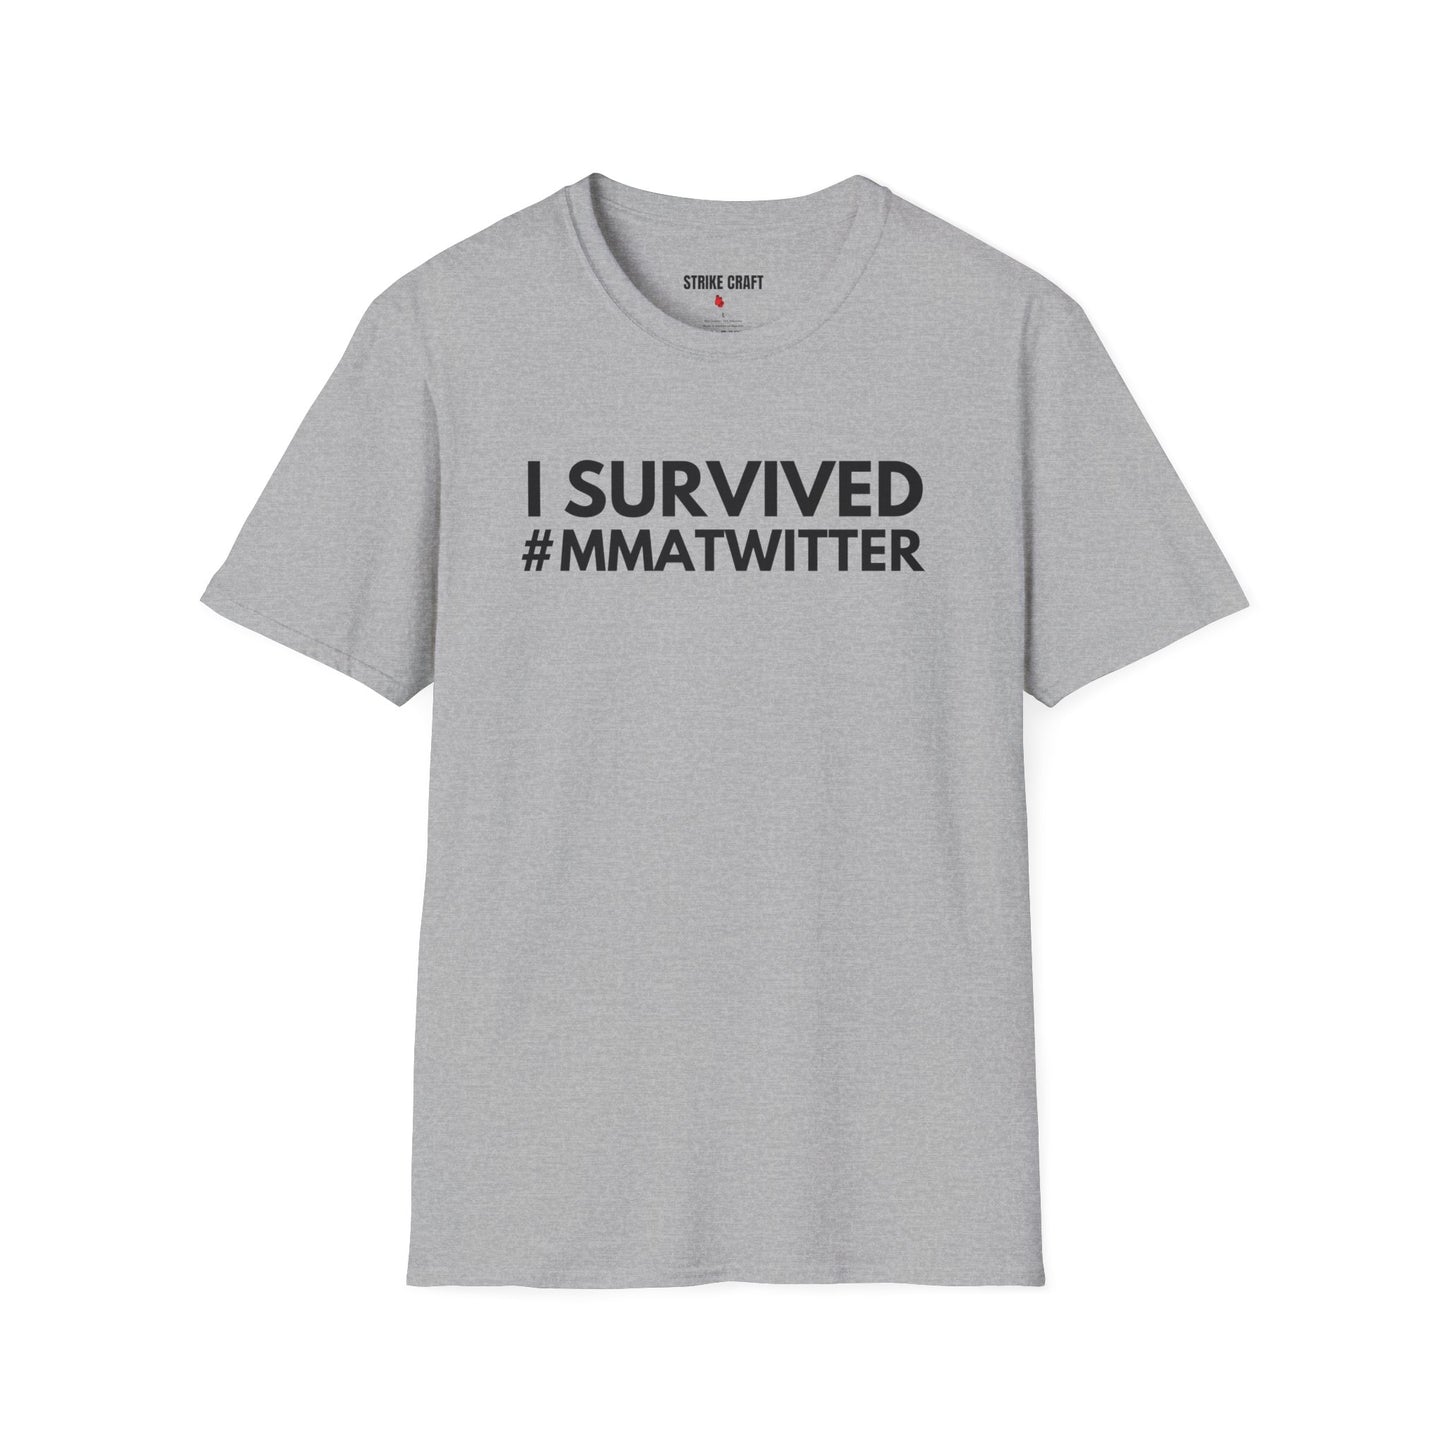 I SURVIVED Softstyle T-Shirt